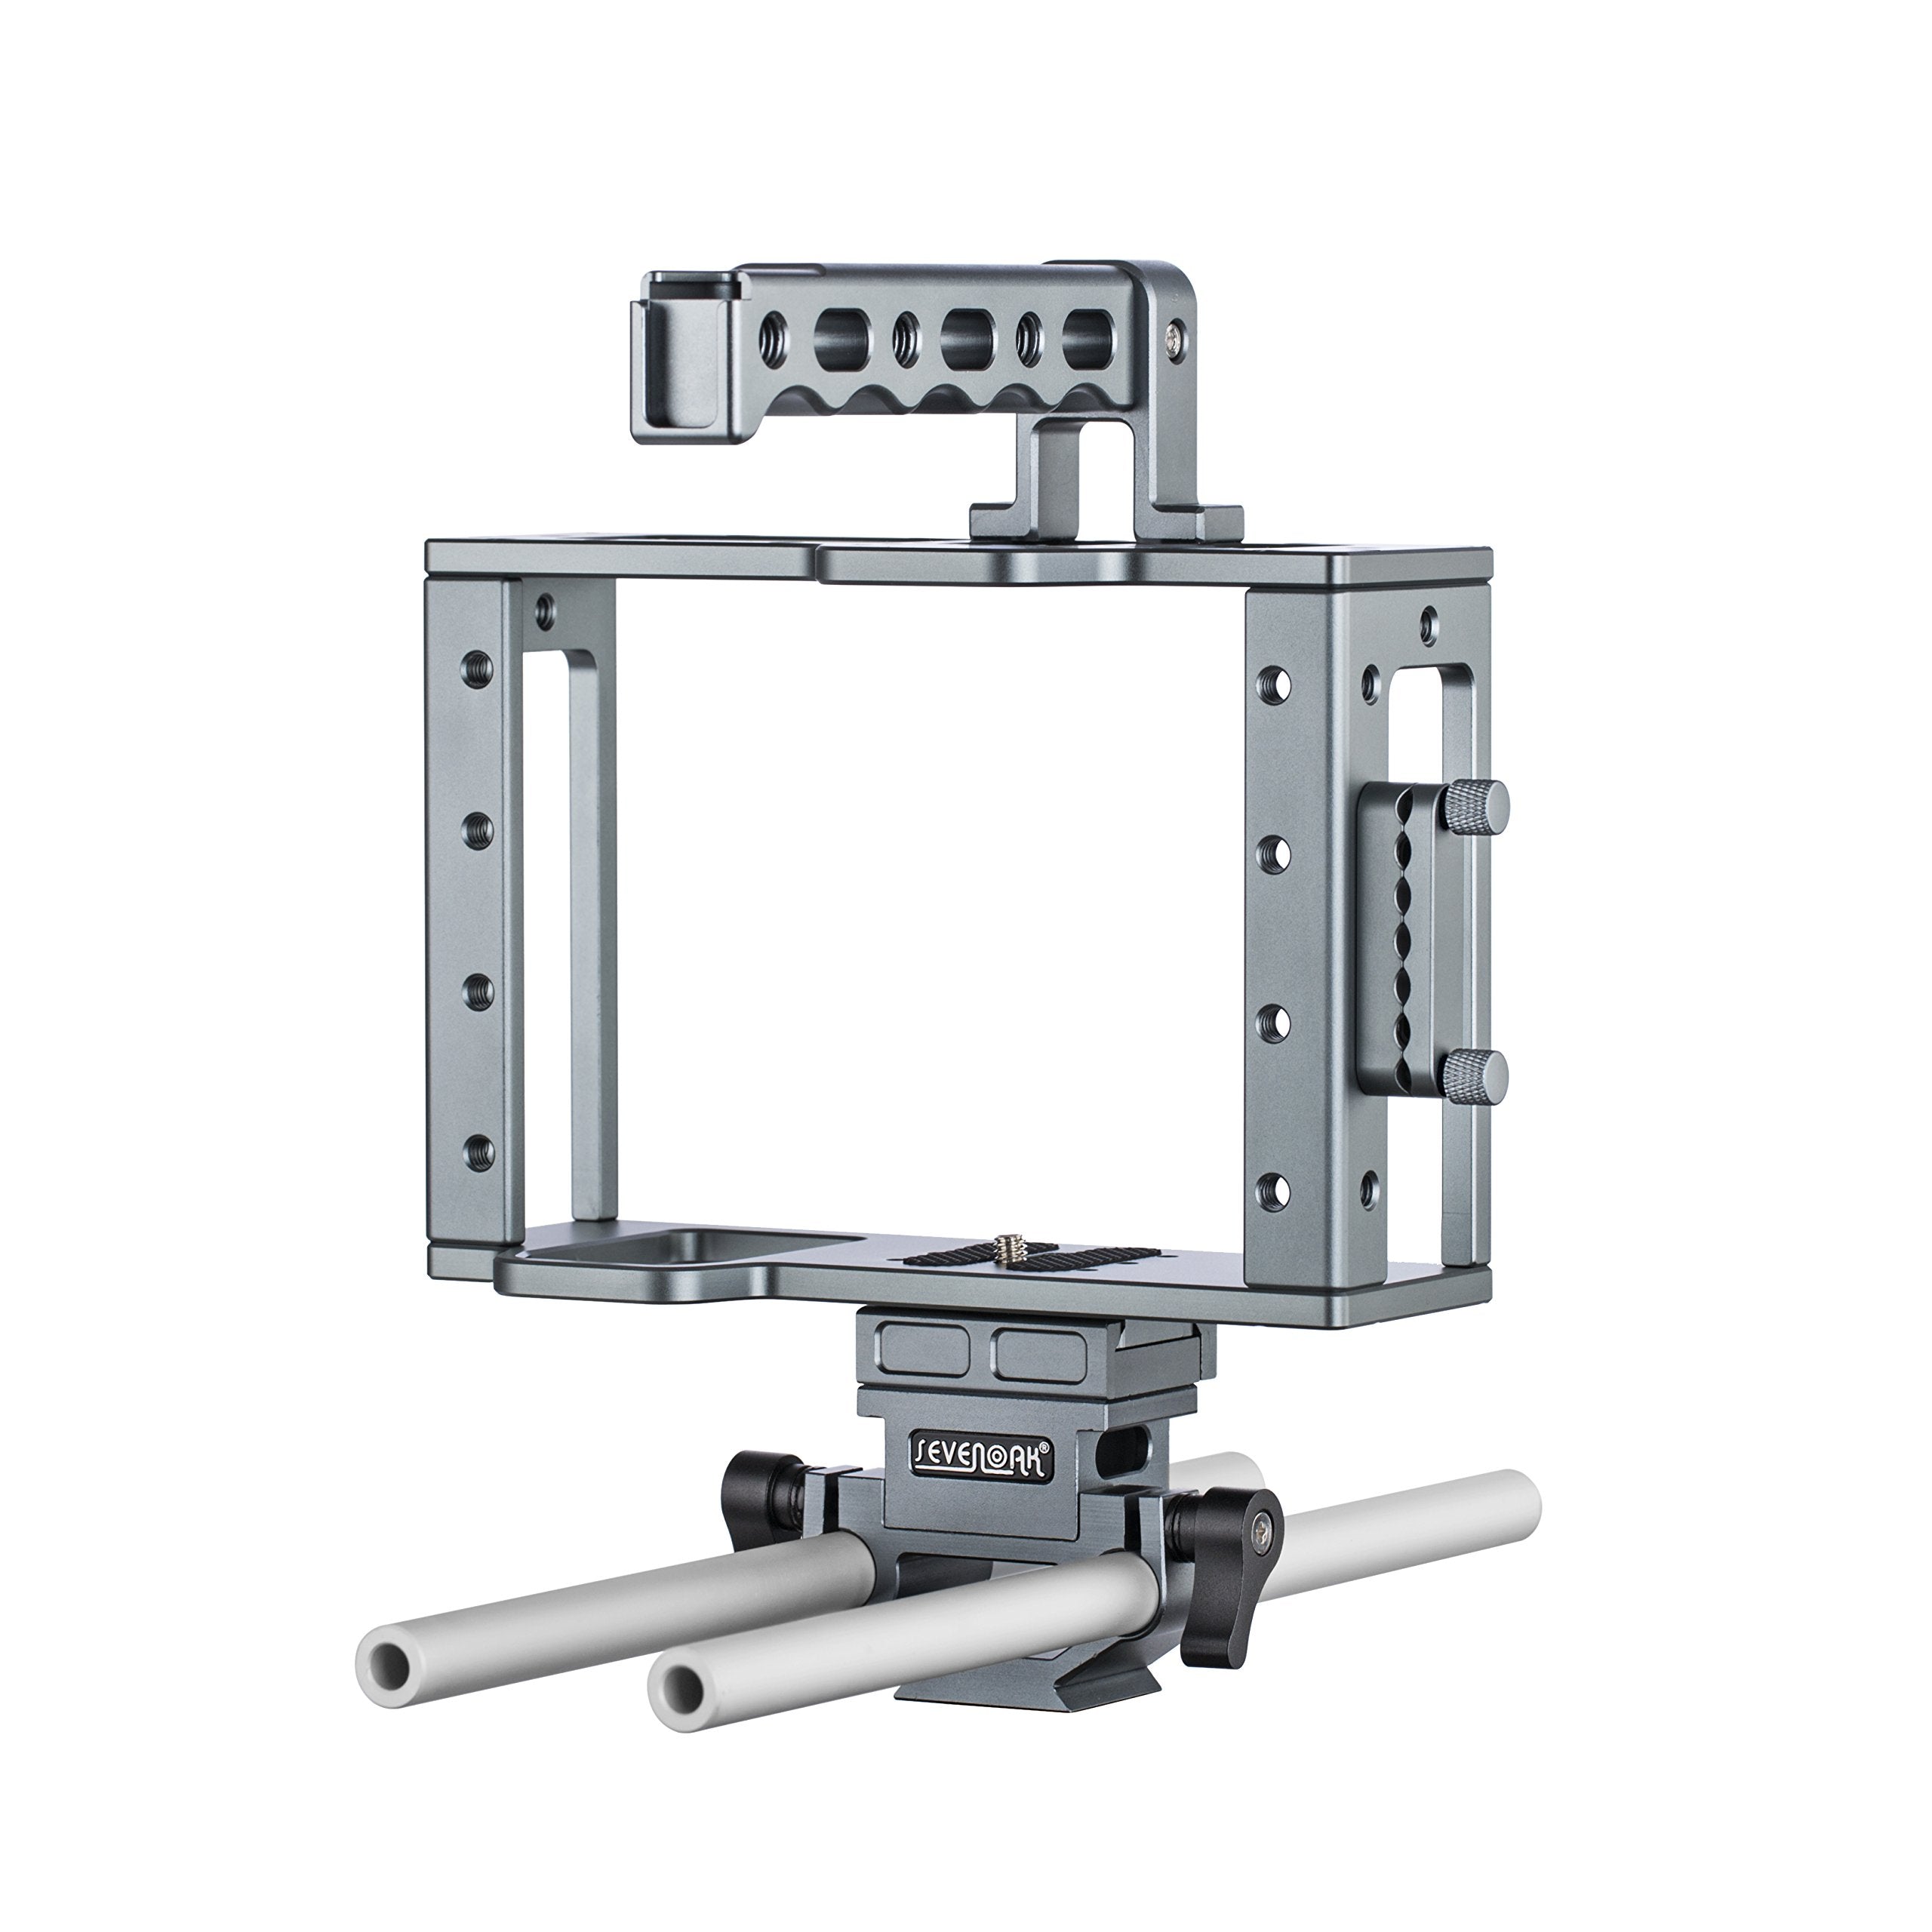 Sevenoak SK-C03 Aluminum Camera Cage with Top Handle, HDMI Adapter, and 15mm Rail System with Quick-Release Base - Universal Design fits DSLR Cameras with and Without Battery Grip  - Very Good